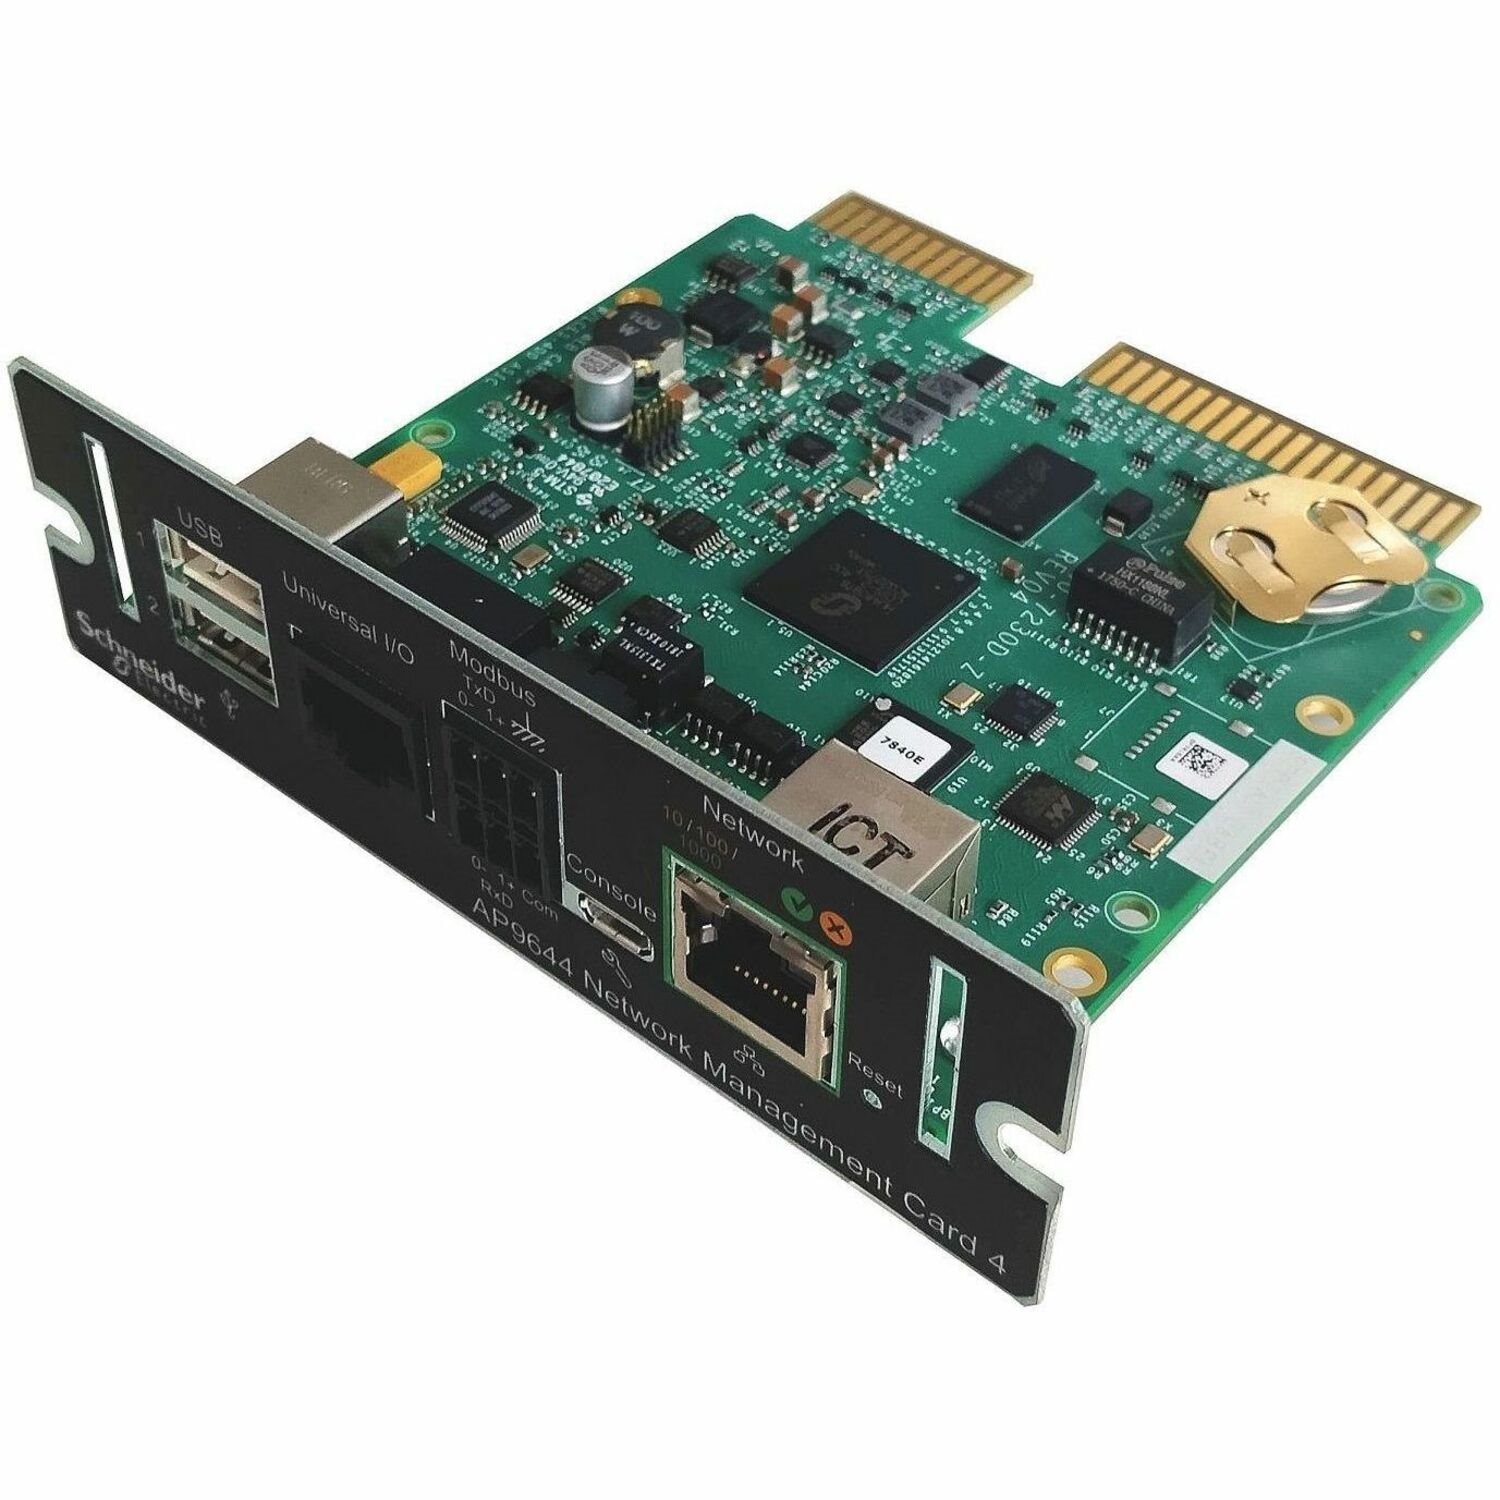 APC by Schneider Electric Network Management Card LCES2 with Modbus, Ethernet and Aux Sensors